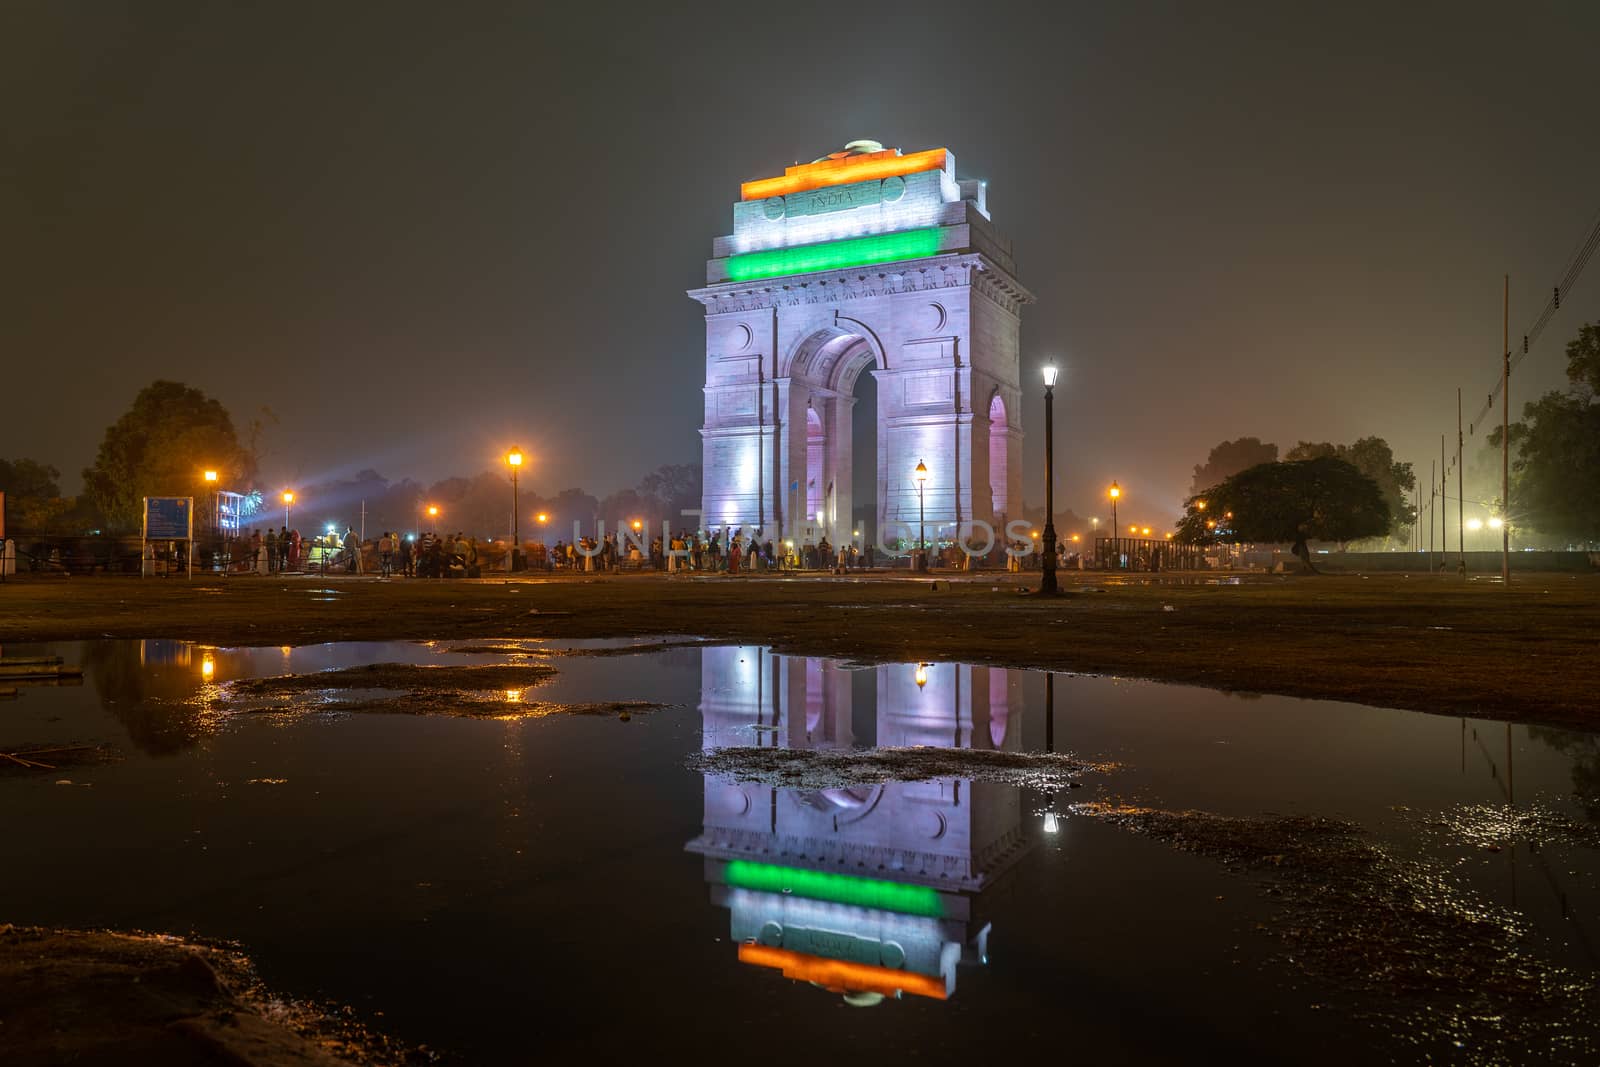 New Delhi, India - December 13, 2019: People in front of the illuminated India Gate at night